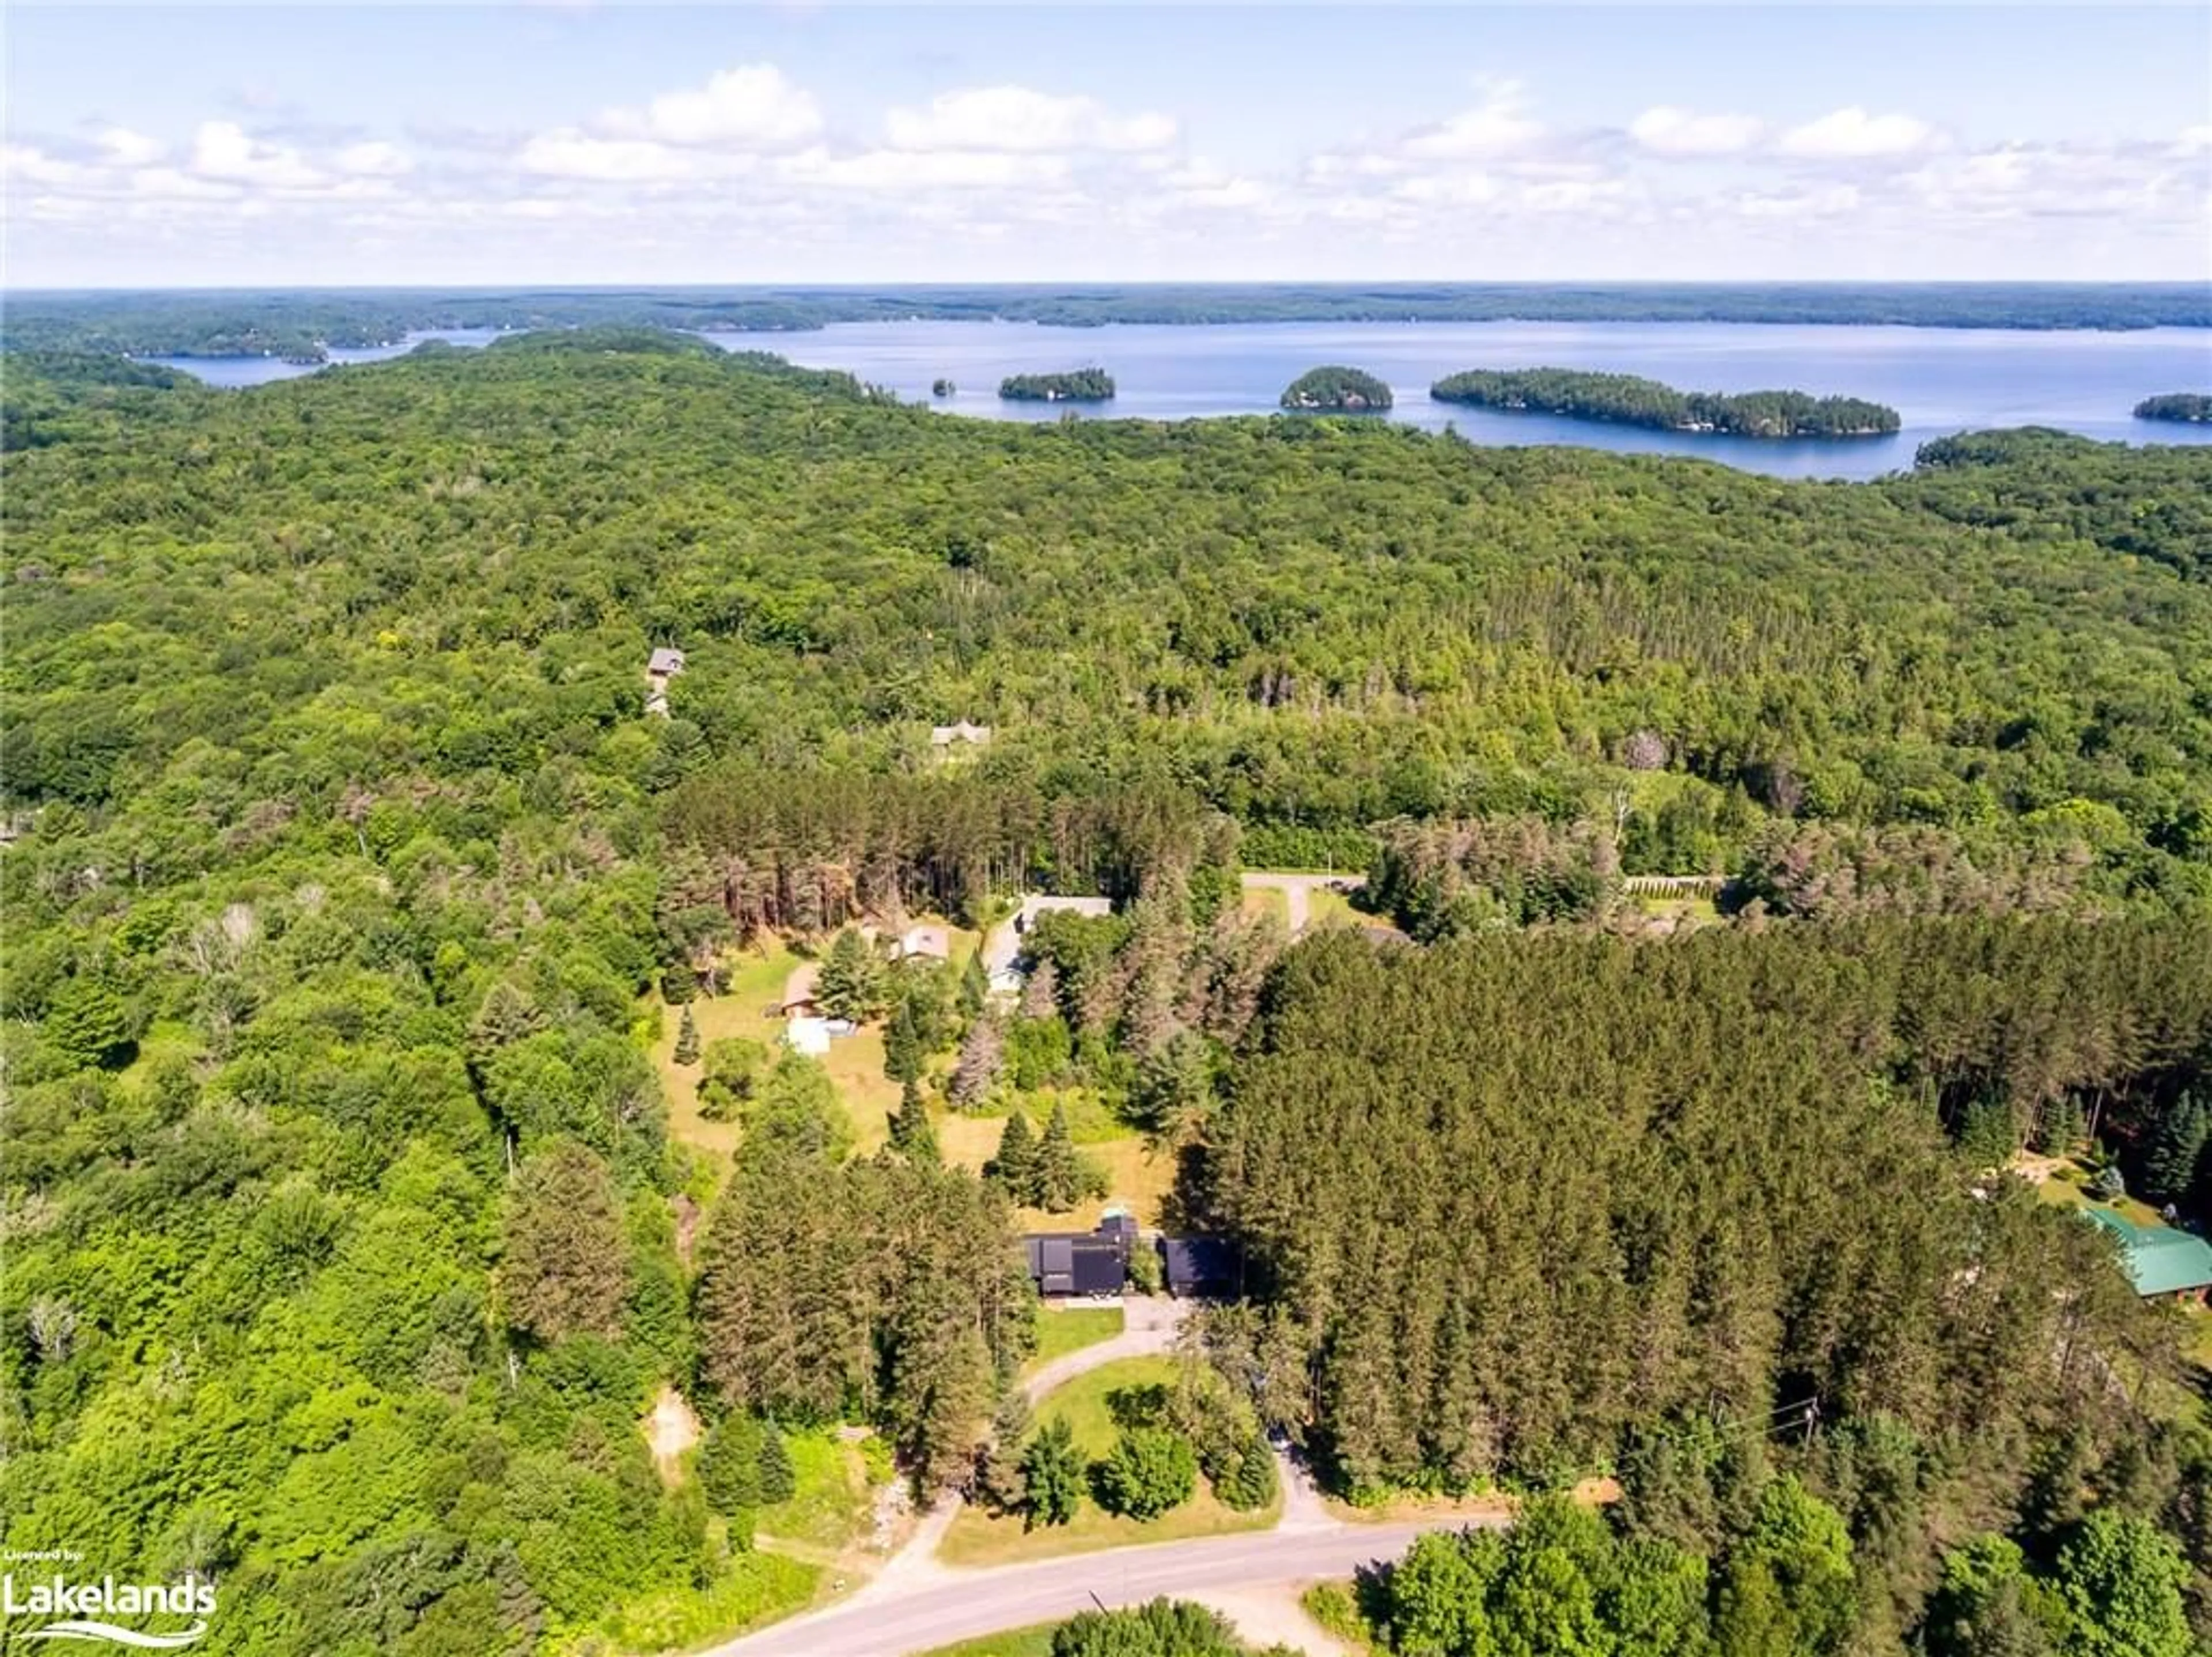 Lakeview for 1049 Lawrence Pit Rd, Utterson Ontario P0B 1M0